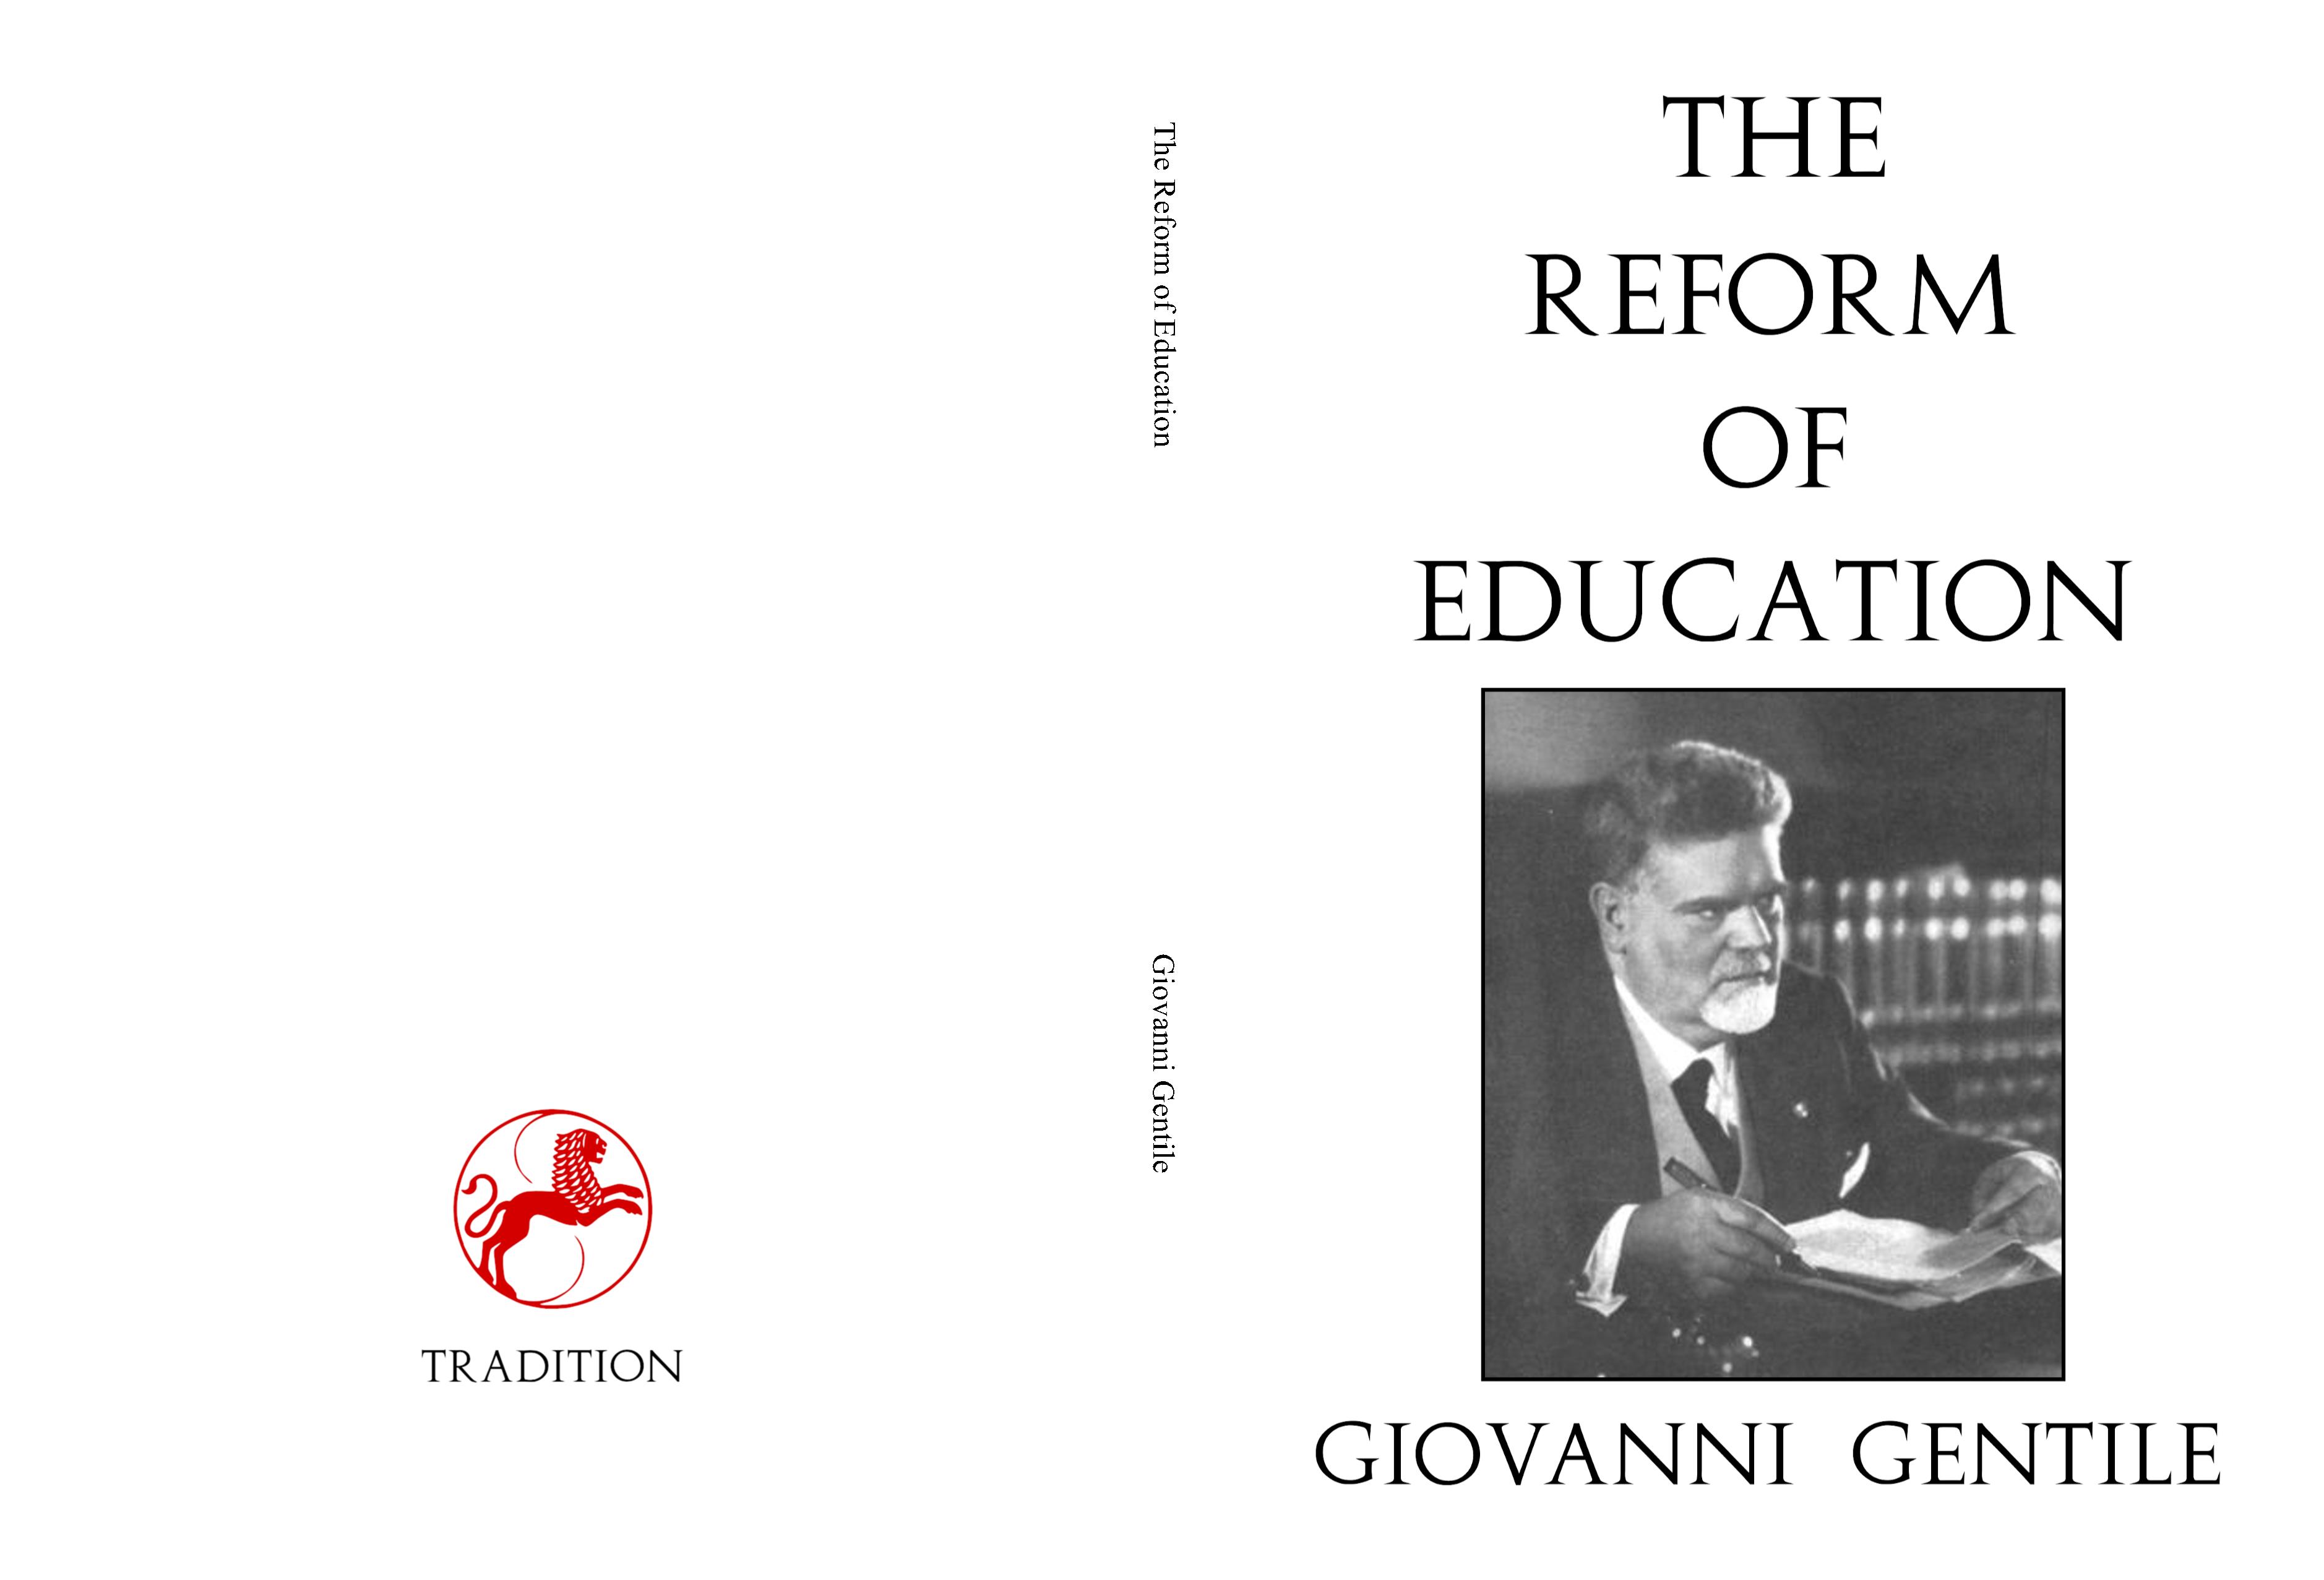 The Reform of Education cover image